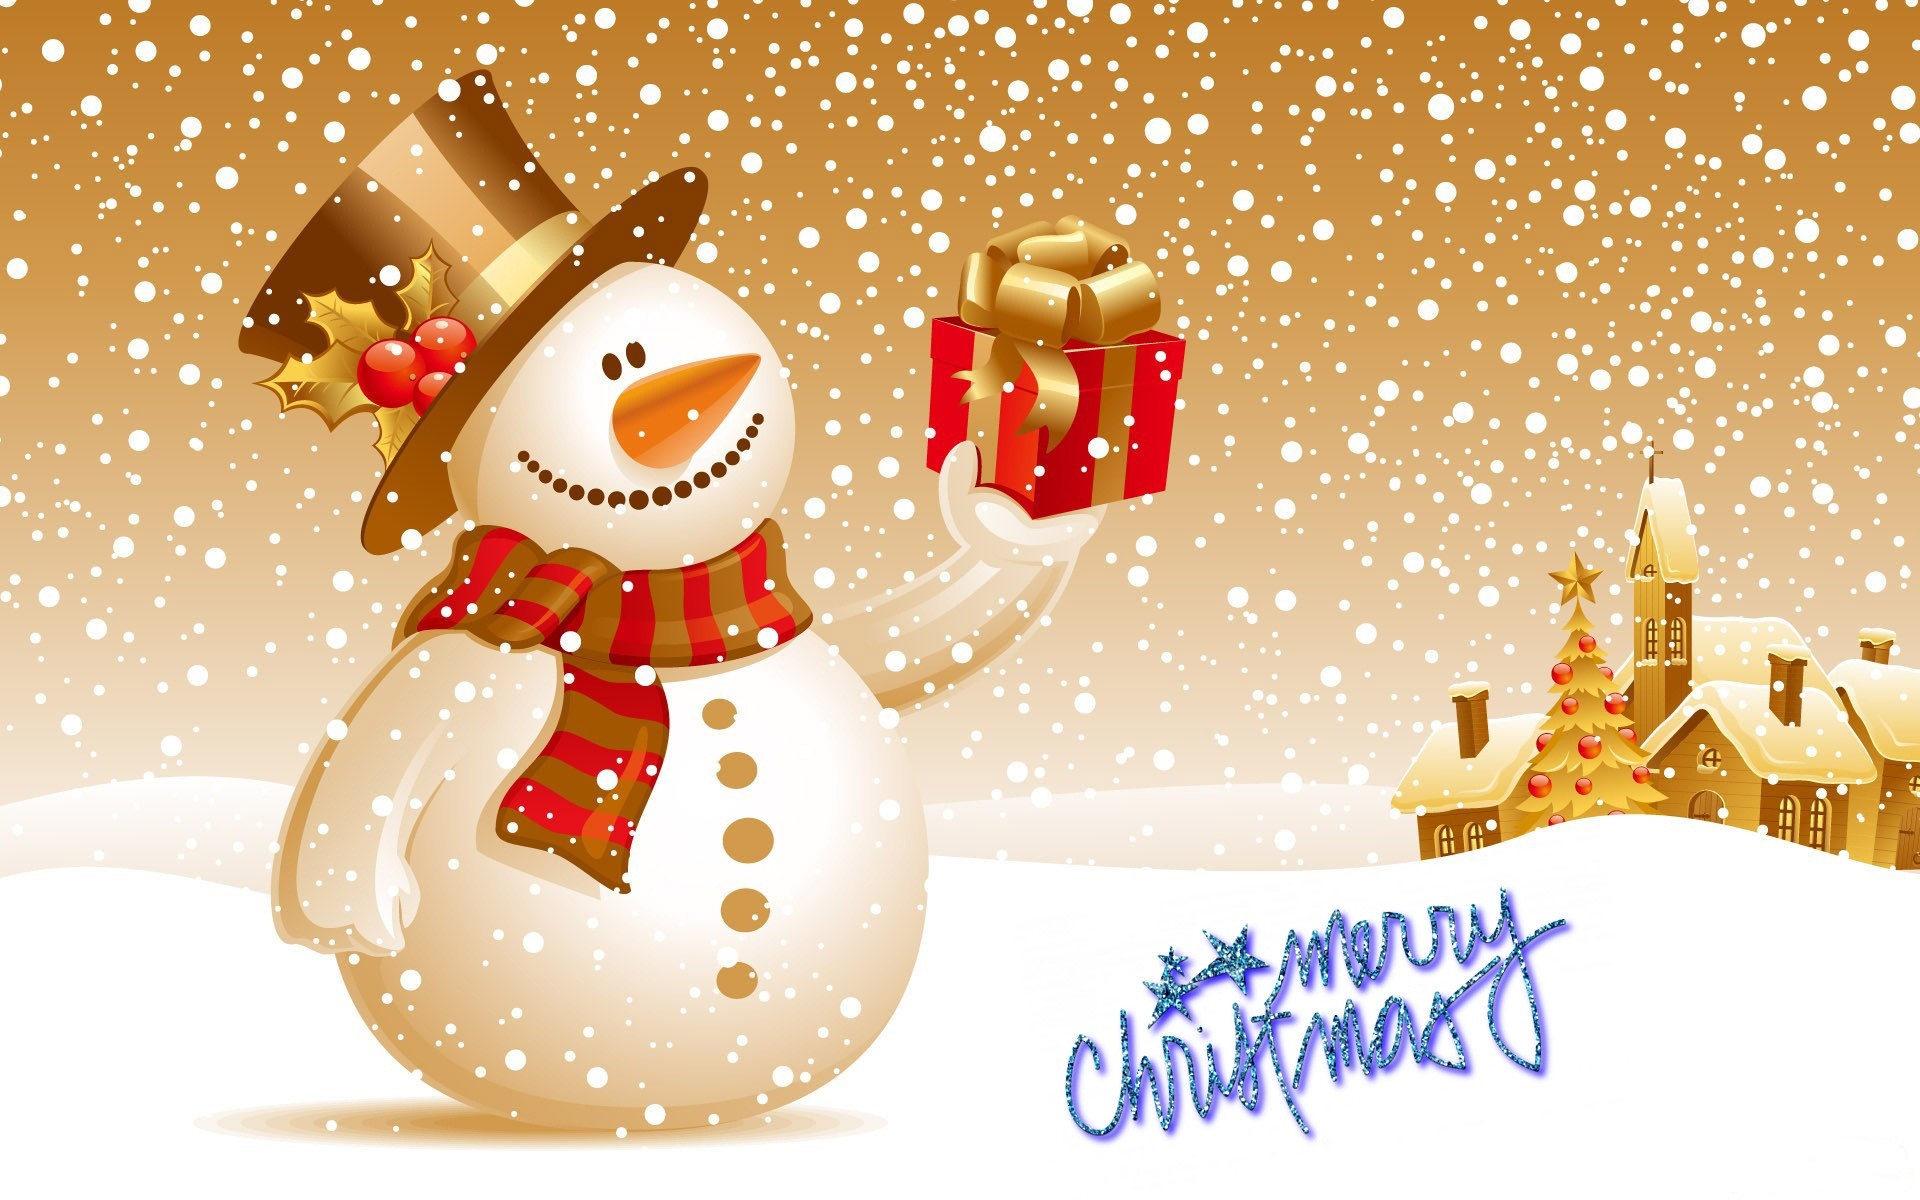 1920x1200 Merry Christmas Greetings Wallpapers | Free Merry Christmas Greetings .